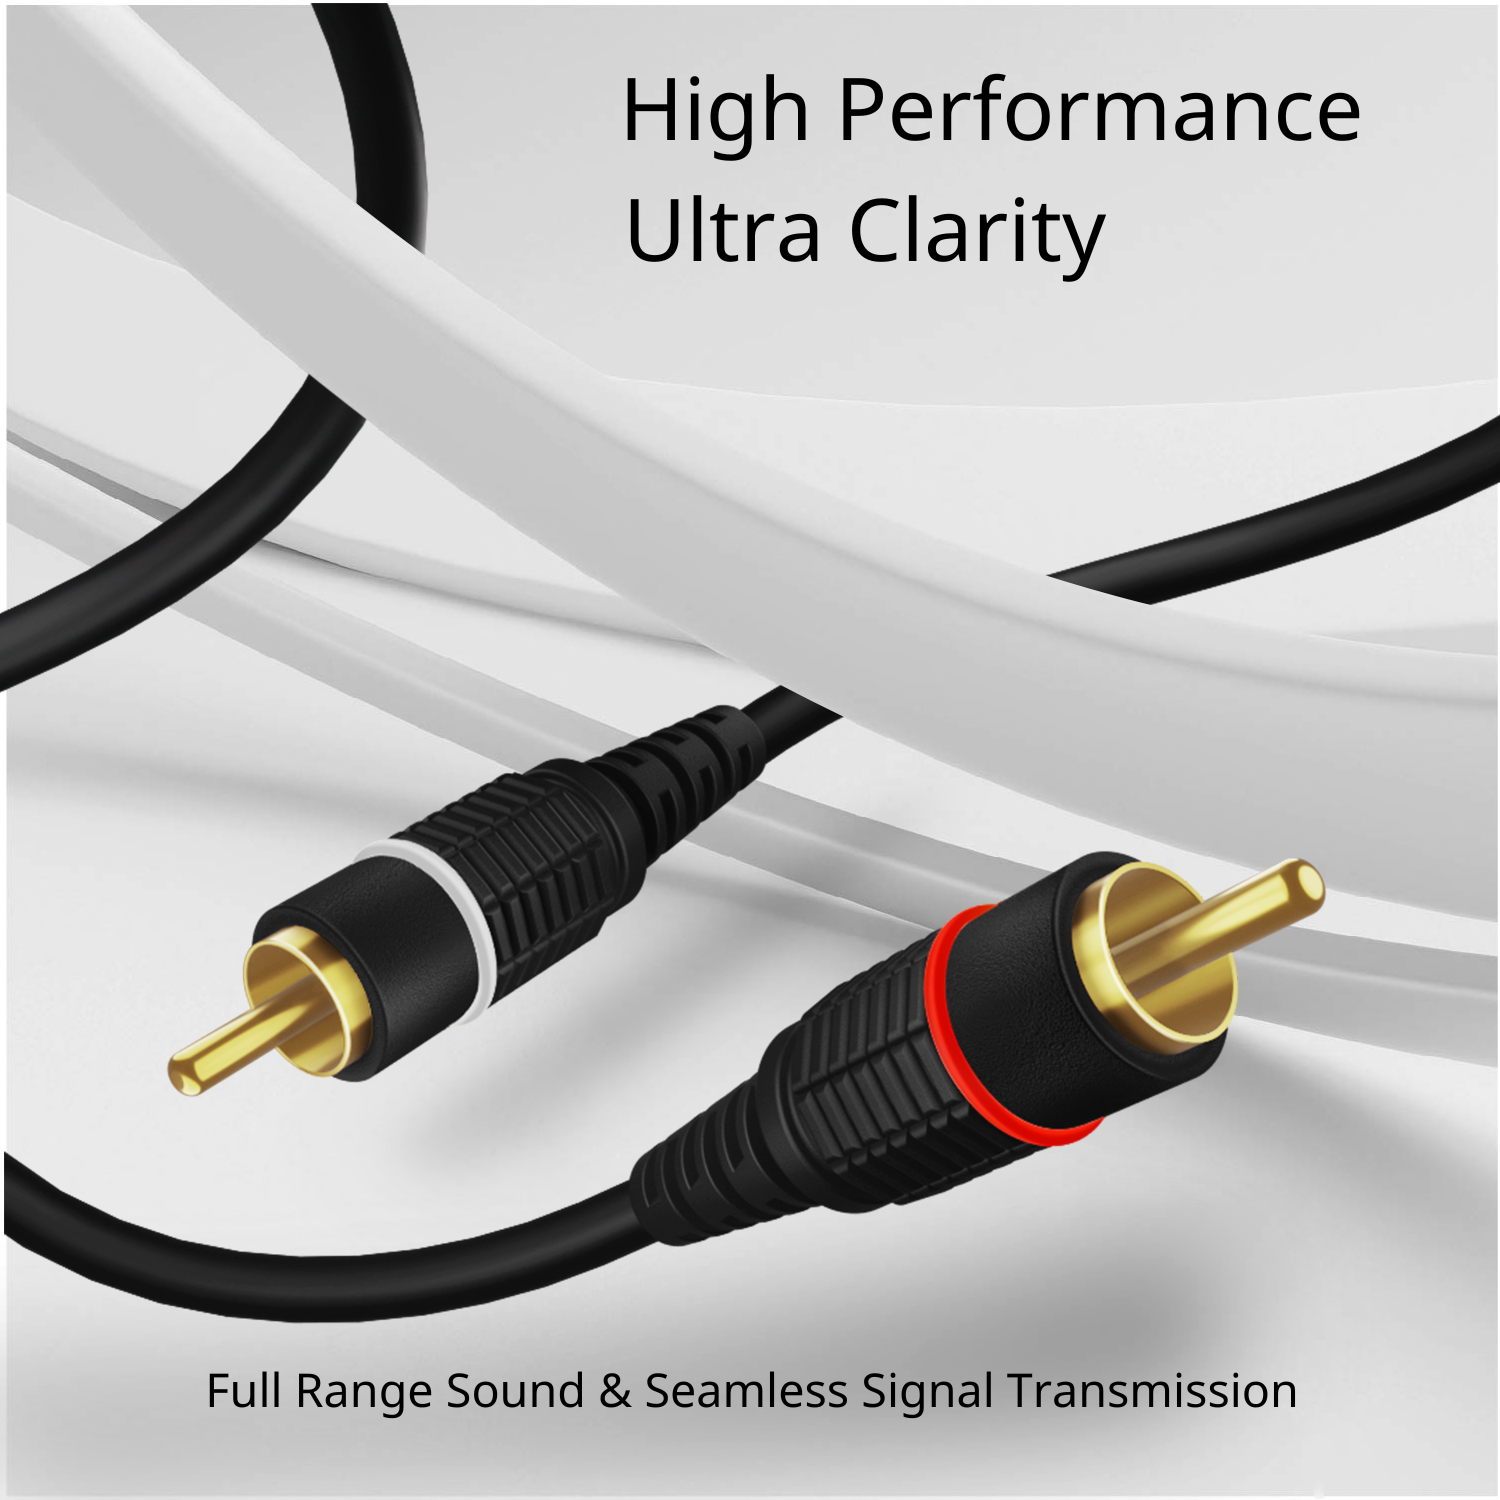 2RCA Stereo Audio Cable (6 Feet) - Dual RCA Plug M/M 2 Channel (Right and Left) Gold Plated Dual Shielded RCA to RCA Male Connectors Black - image 2 of 6